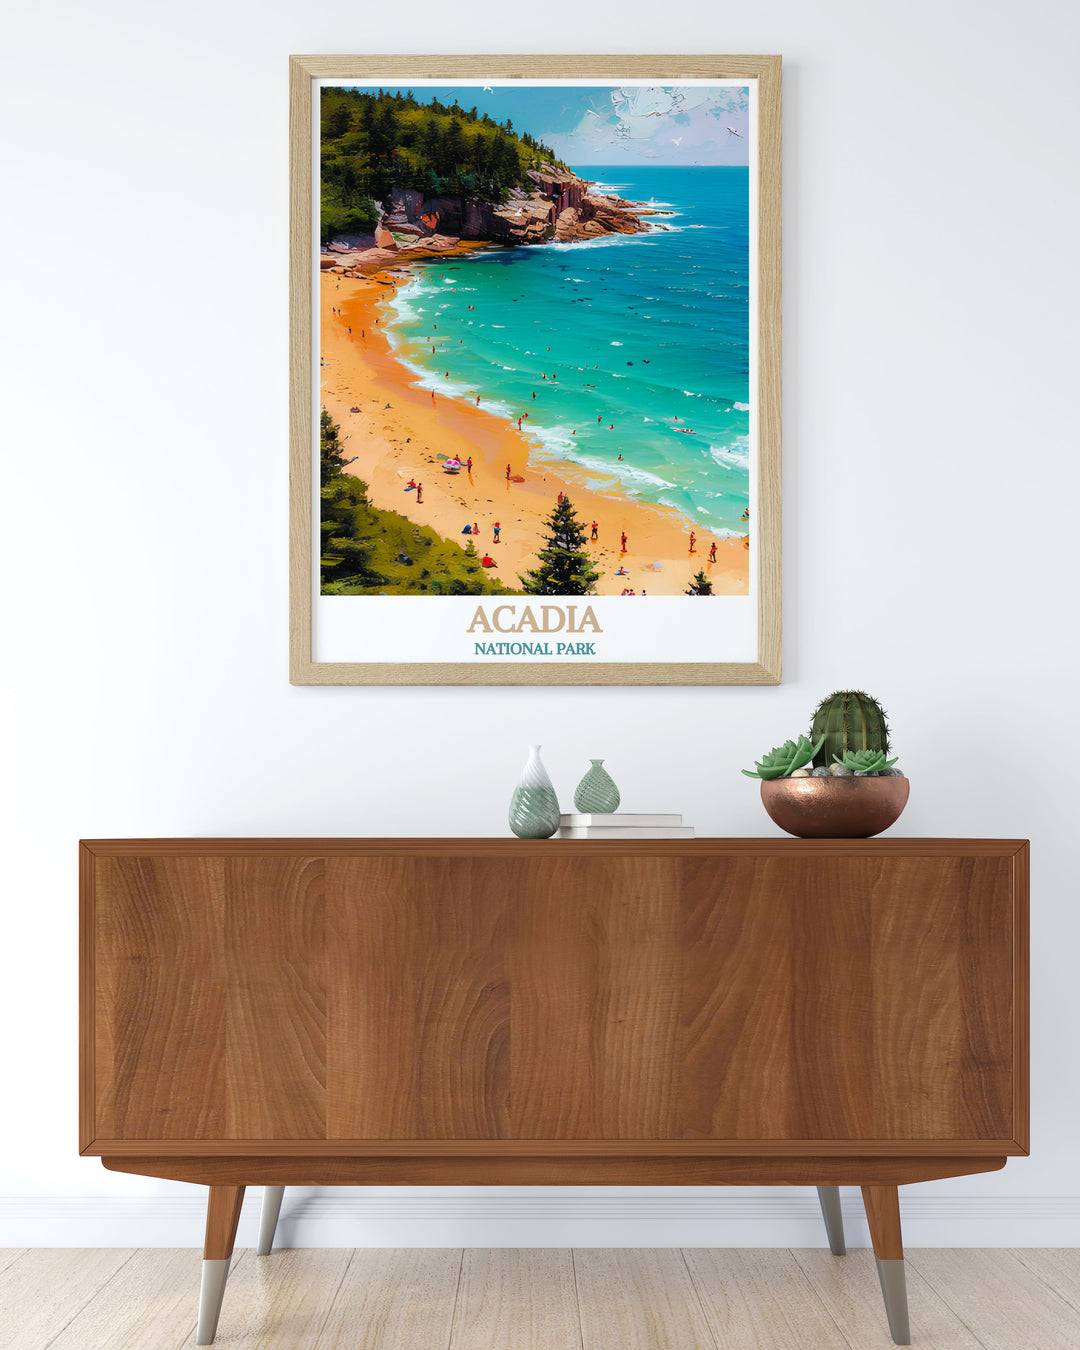 Captivating Acadia National Park print featuring the iconic Sand Beach this artwork brings a touch of wilderness to your living space perfect for anyone who appreciates national park prints and retro travel art.